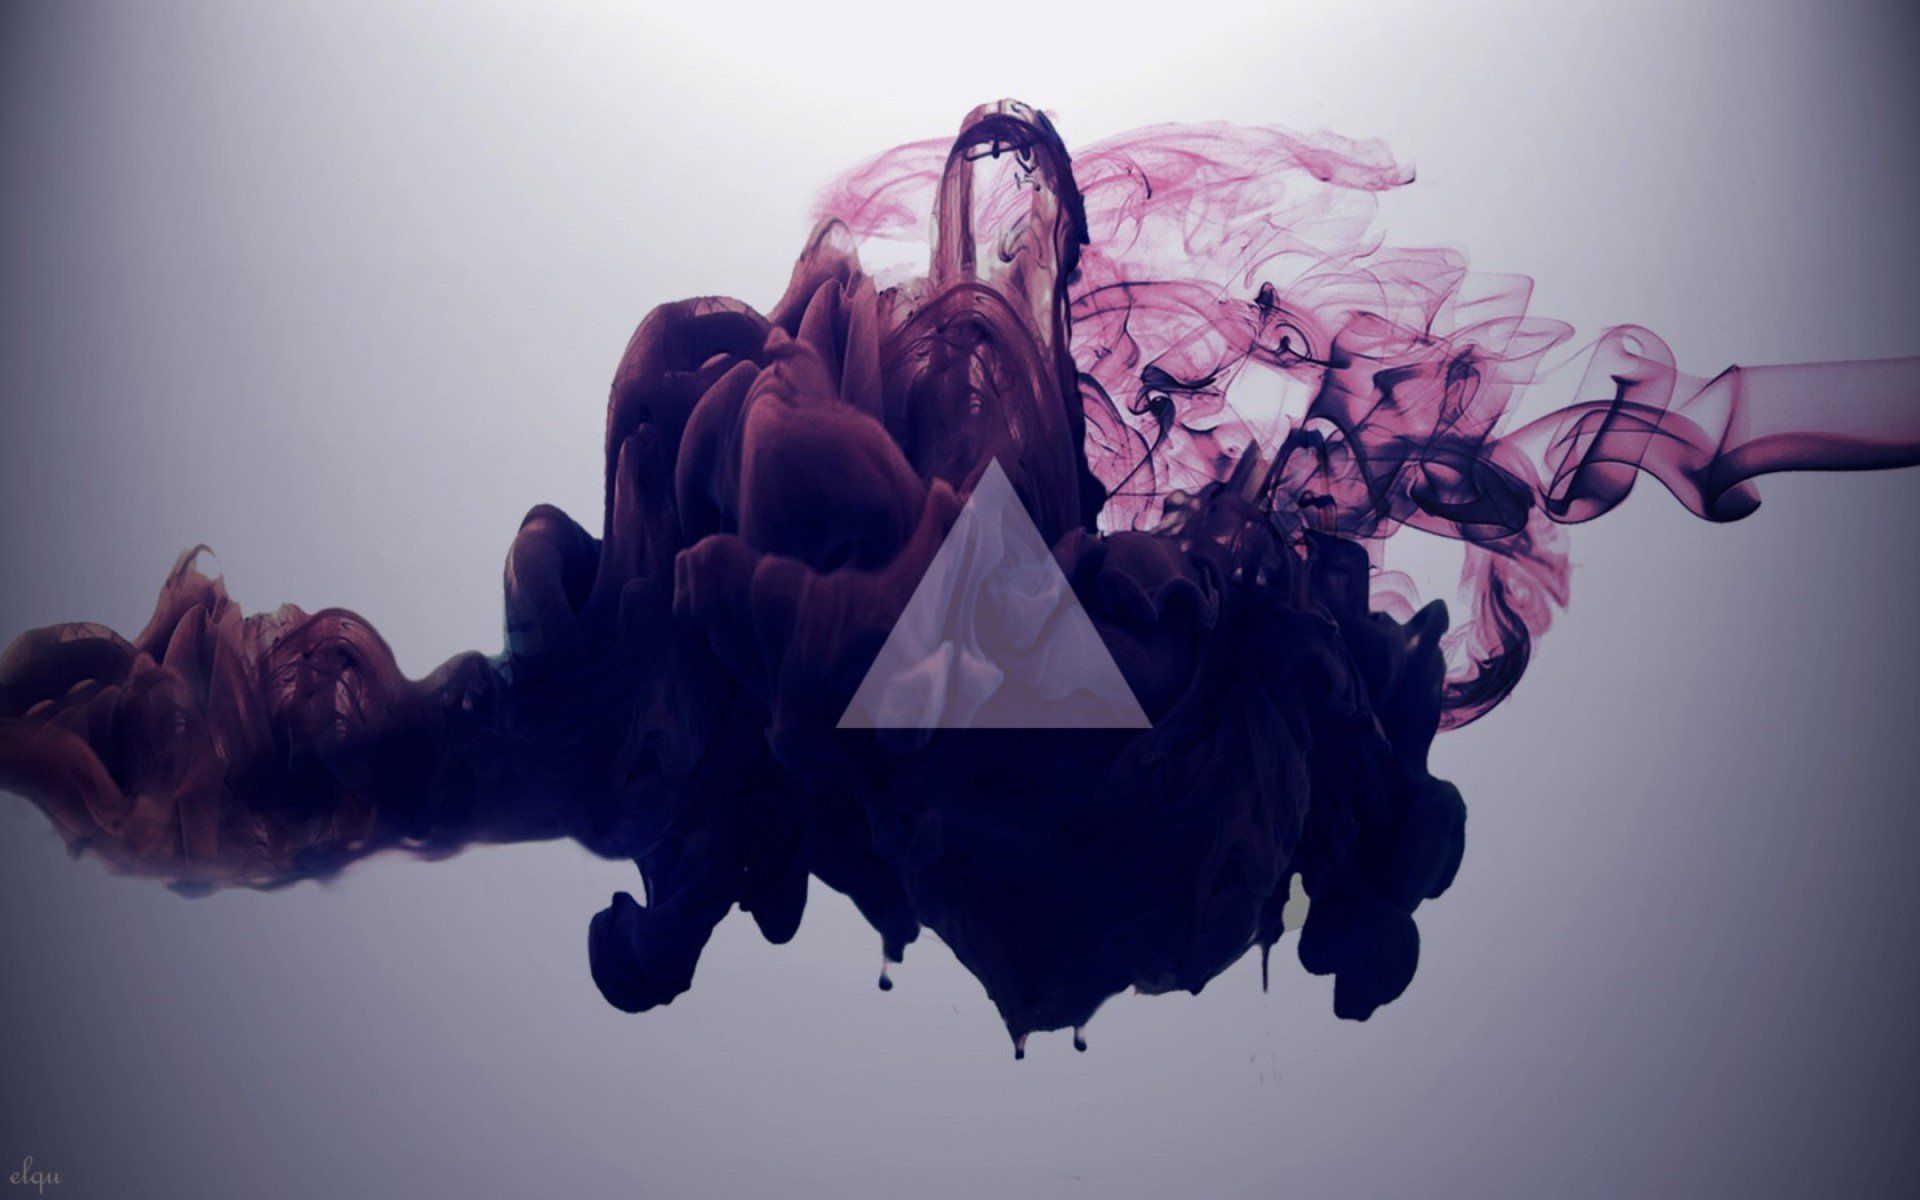 Indie Triangles High Definition Wallpaper For Desktop